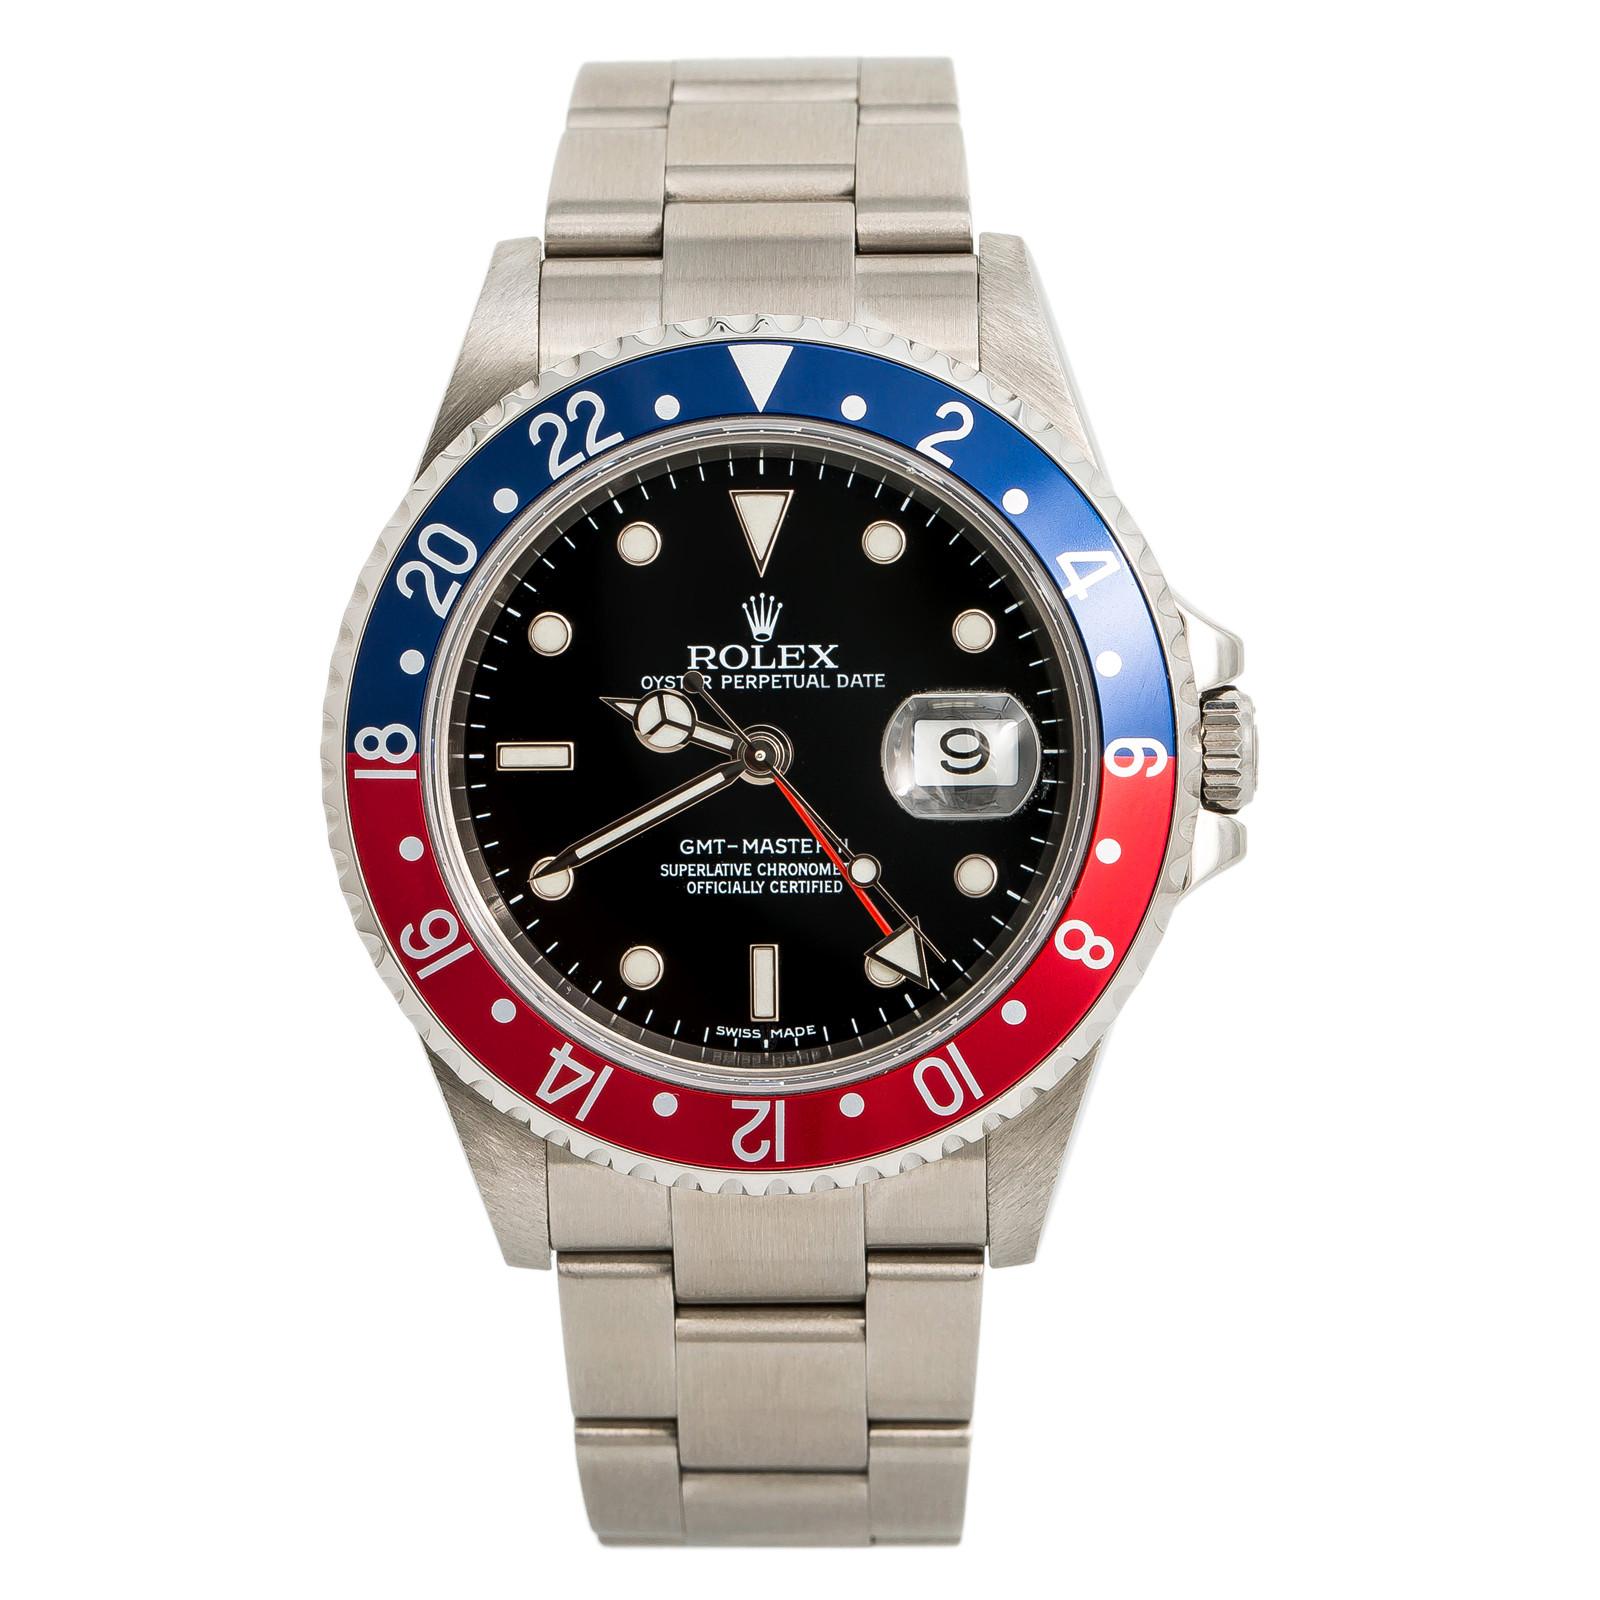 Rolex GMT Master II13800, Dial Certified Authentic For Sale